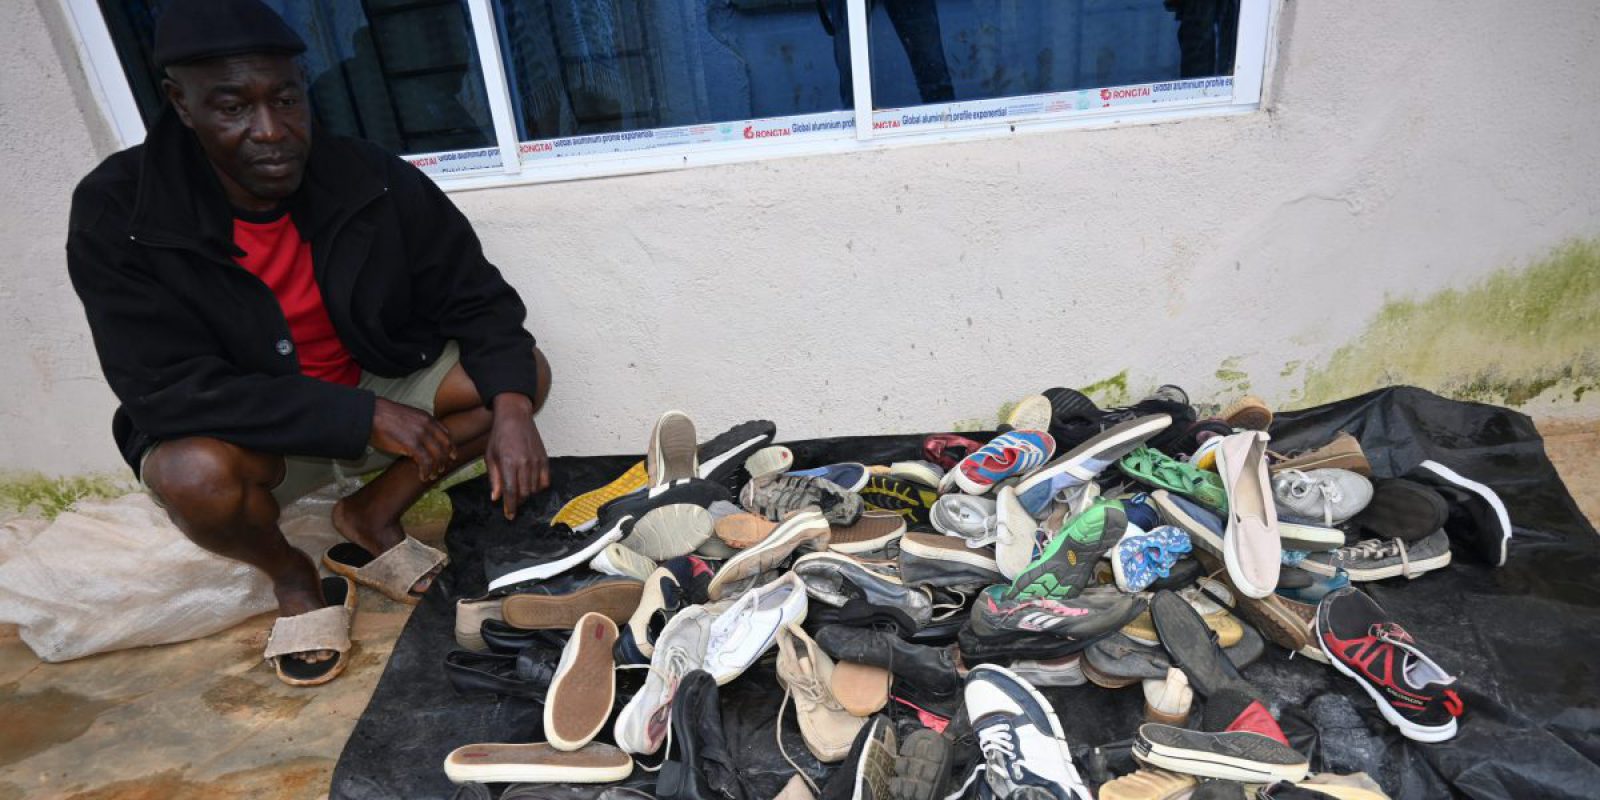 Having fled violence in his homecountry, Nelson, a Cameroonian refugee turns businessman and starts a profitable shoe enterprise in Nigeria.